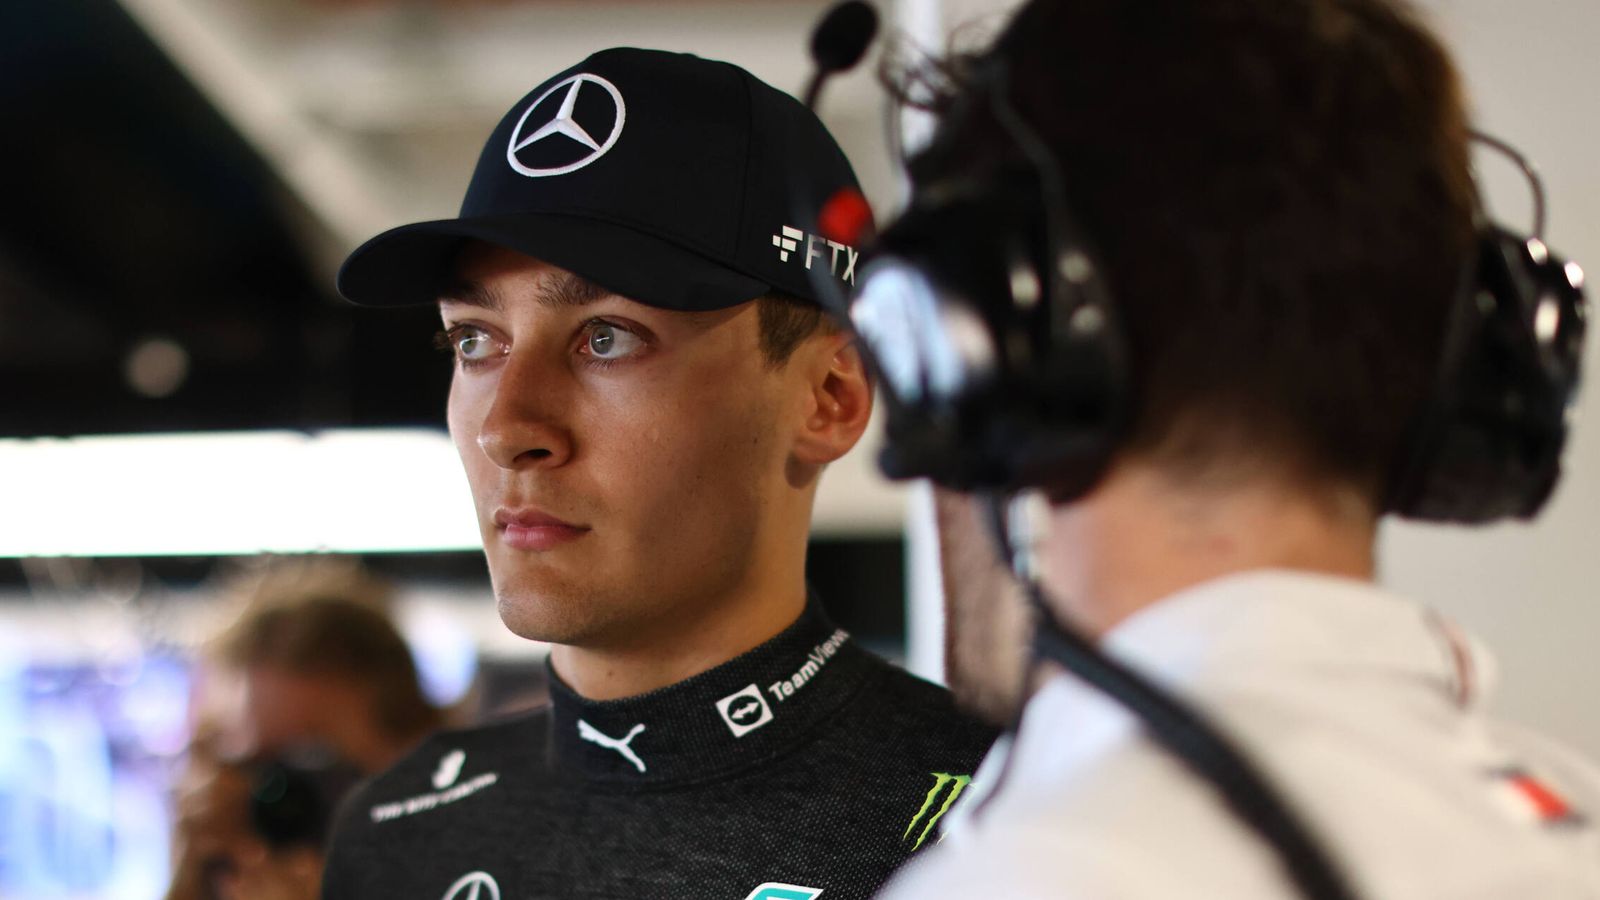 Singapore GP: George Russell to start from pit lane after changing his power unit